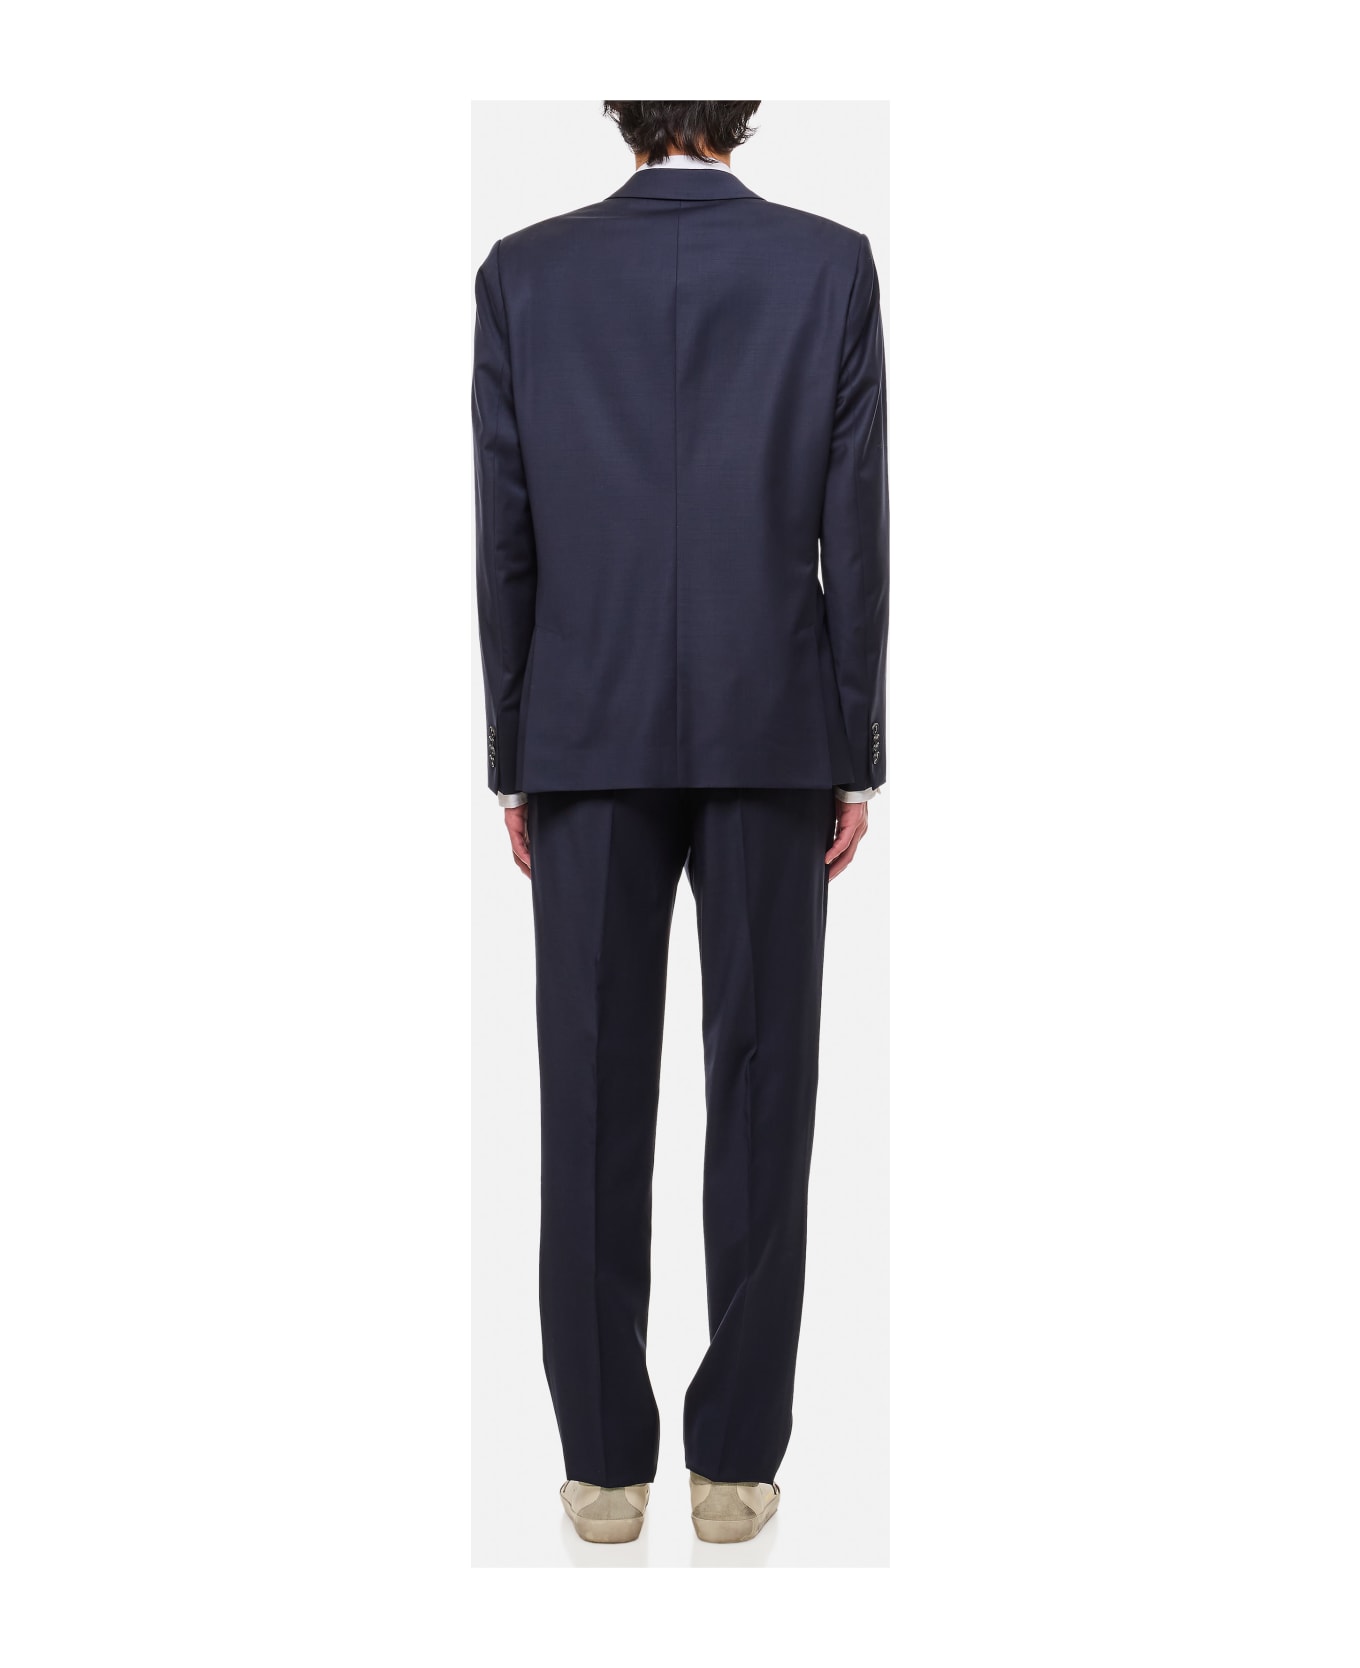 Paul Smith Tailored Fit Jacket - Blue